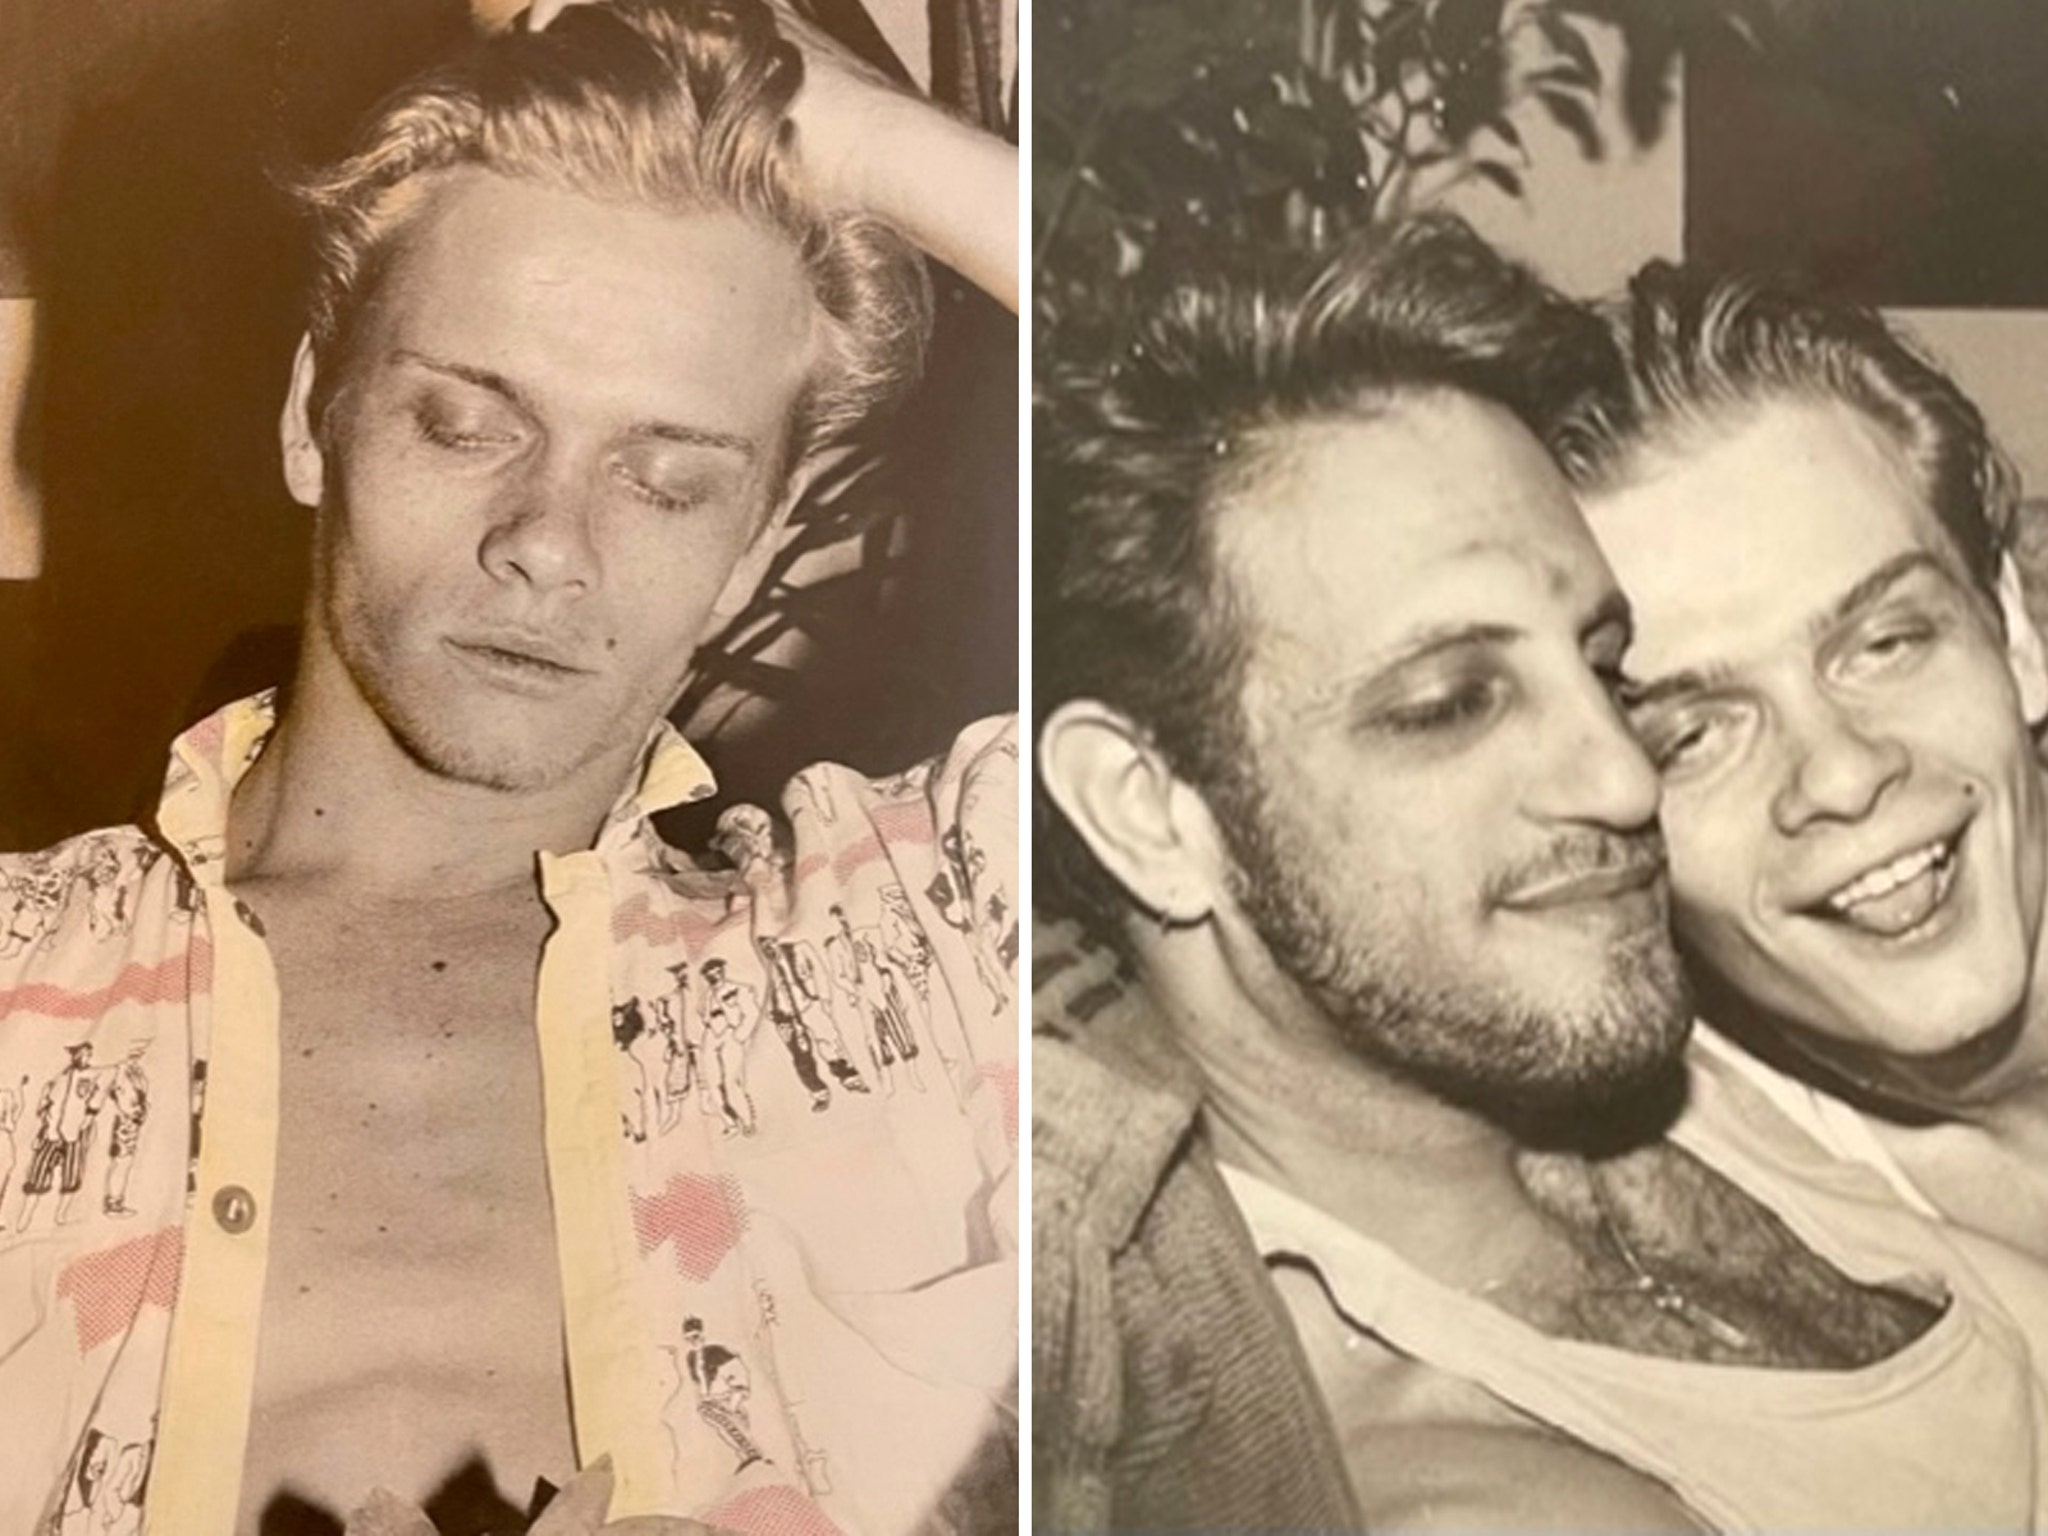 Amateur Old - Gay Porn Star Billy Newton's Brutal Murder Solved Thanks to Amateur Sleuths  32 Years Later